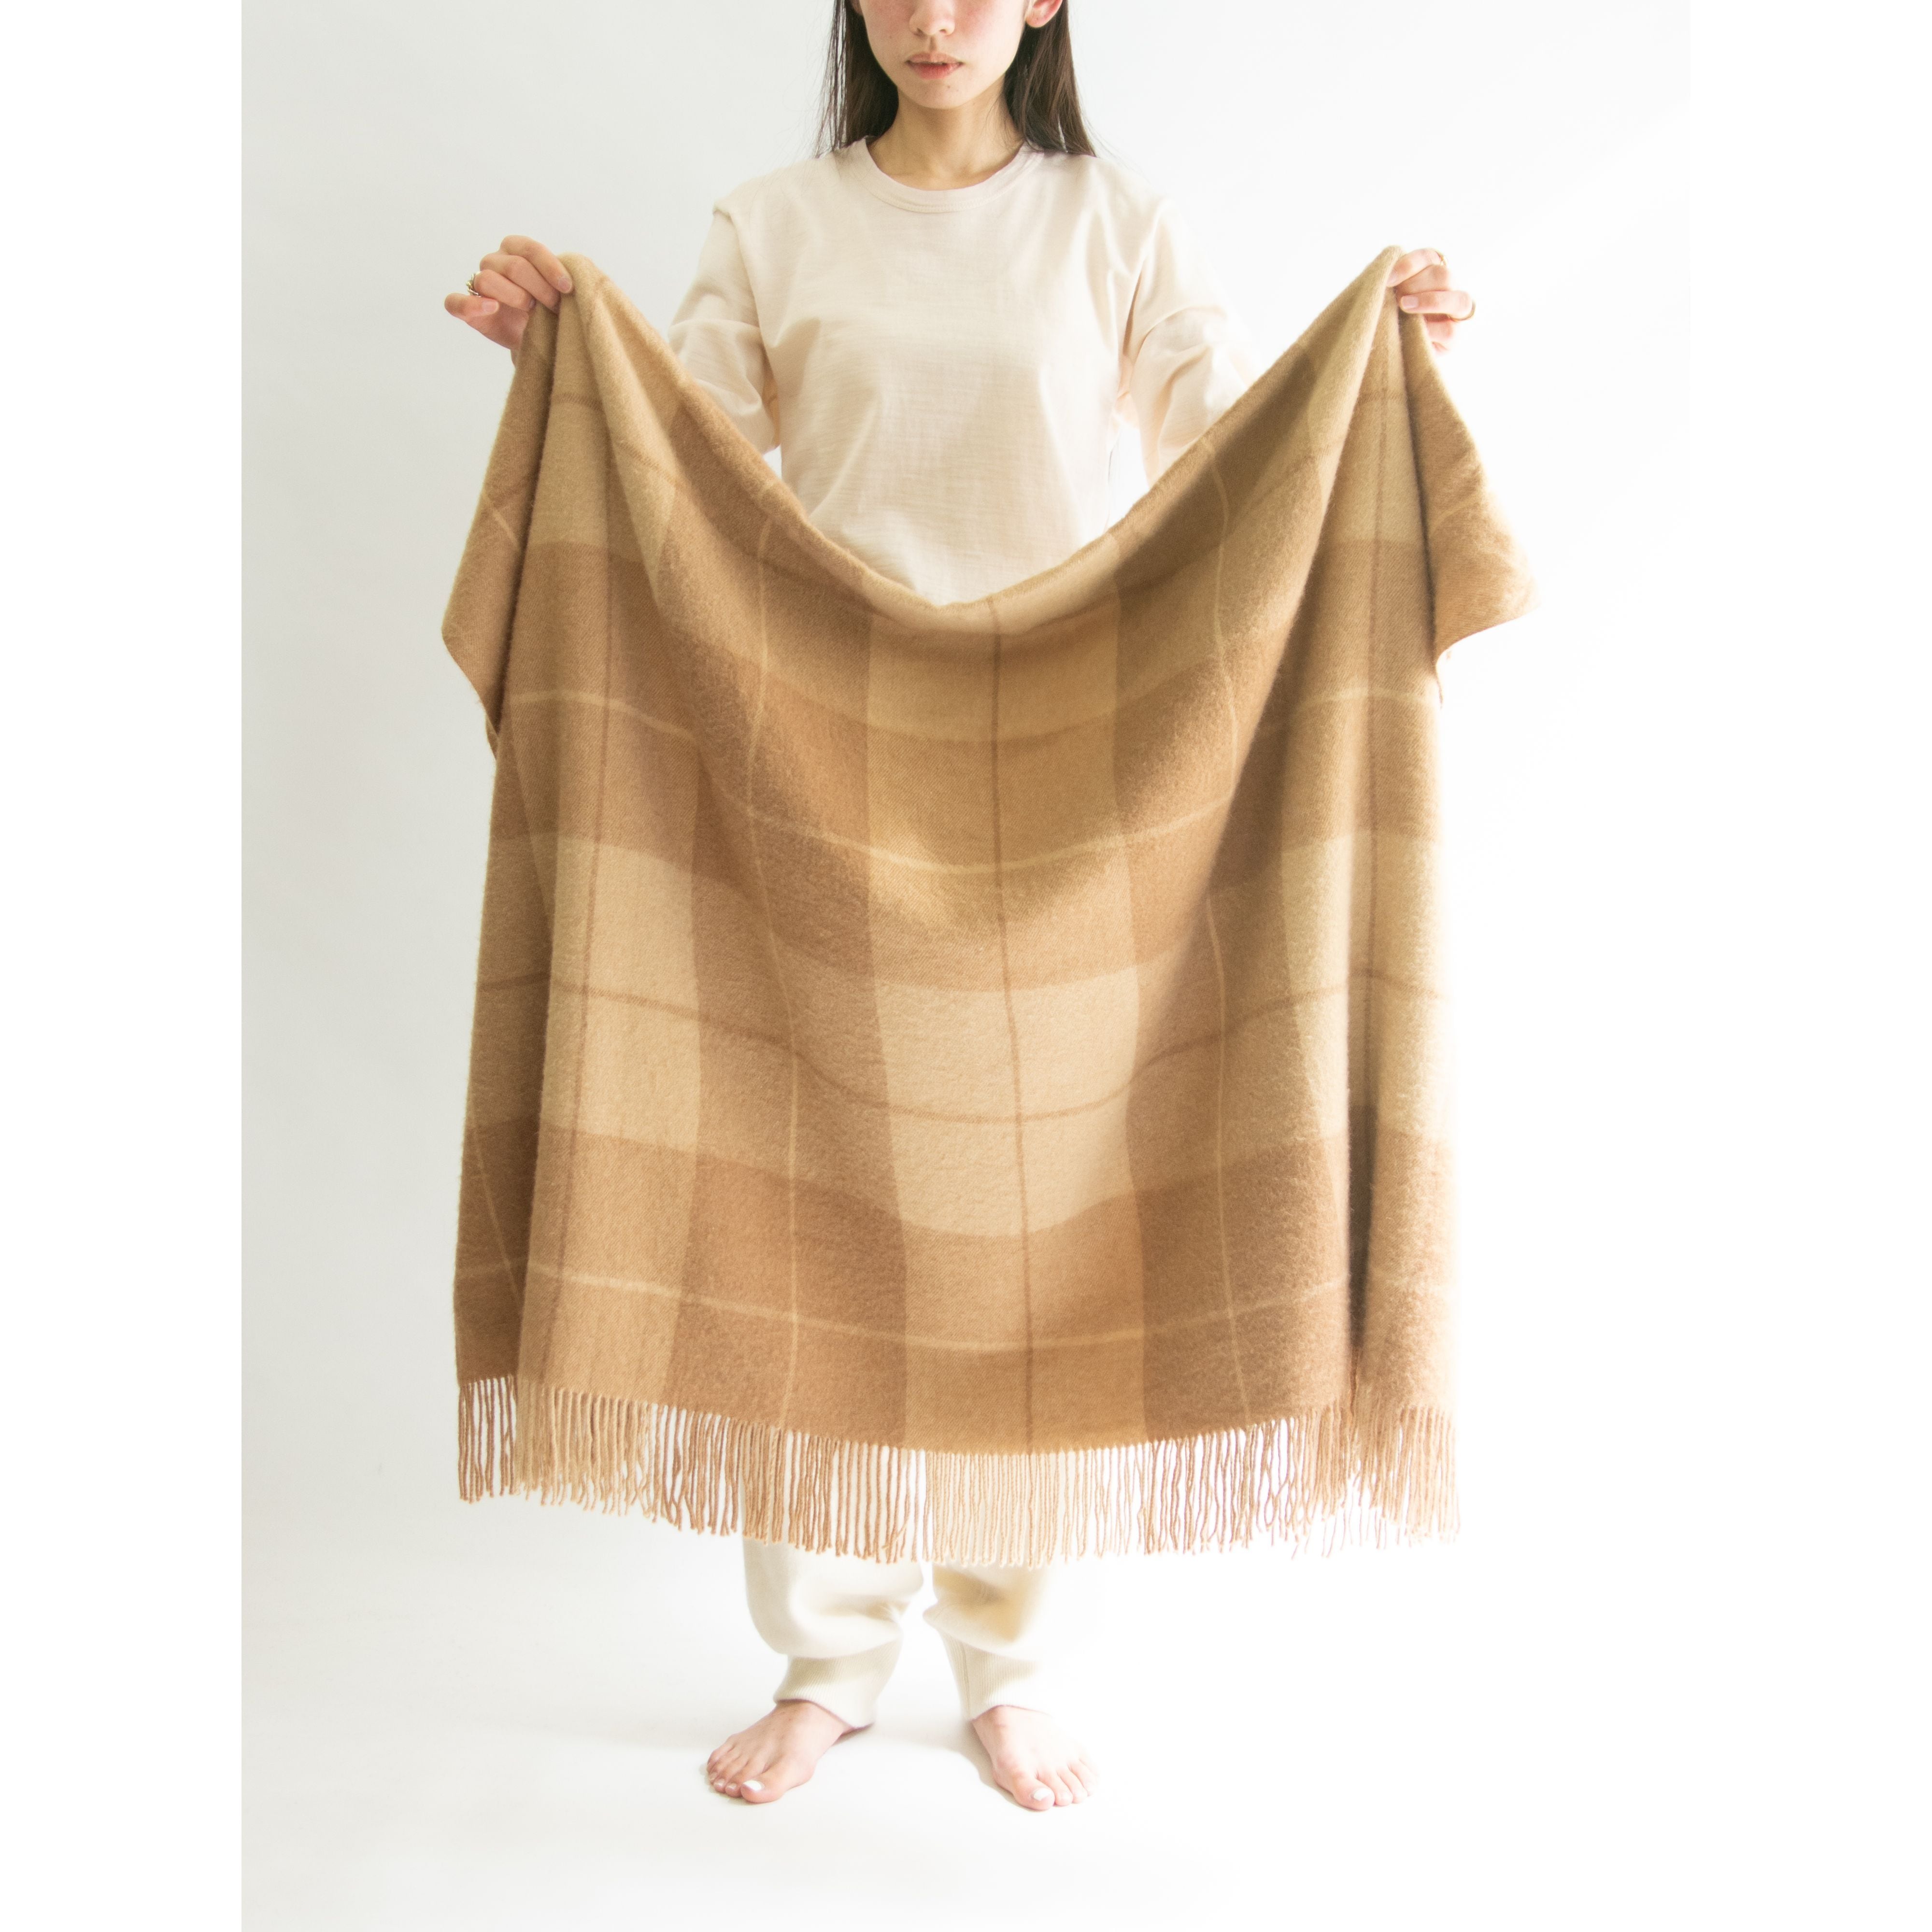 Made in Mongolia】Pure camel hair check blanket 135×180cm